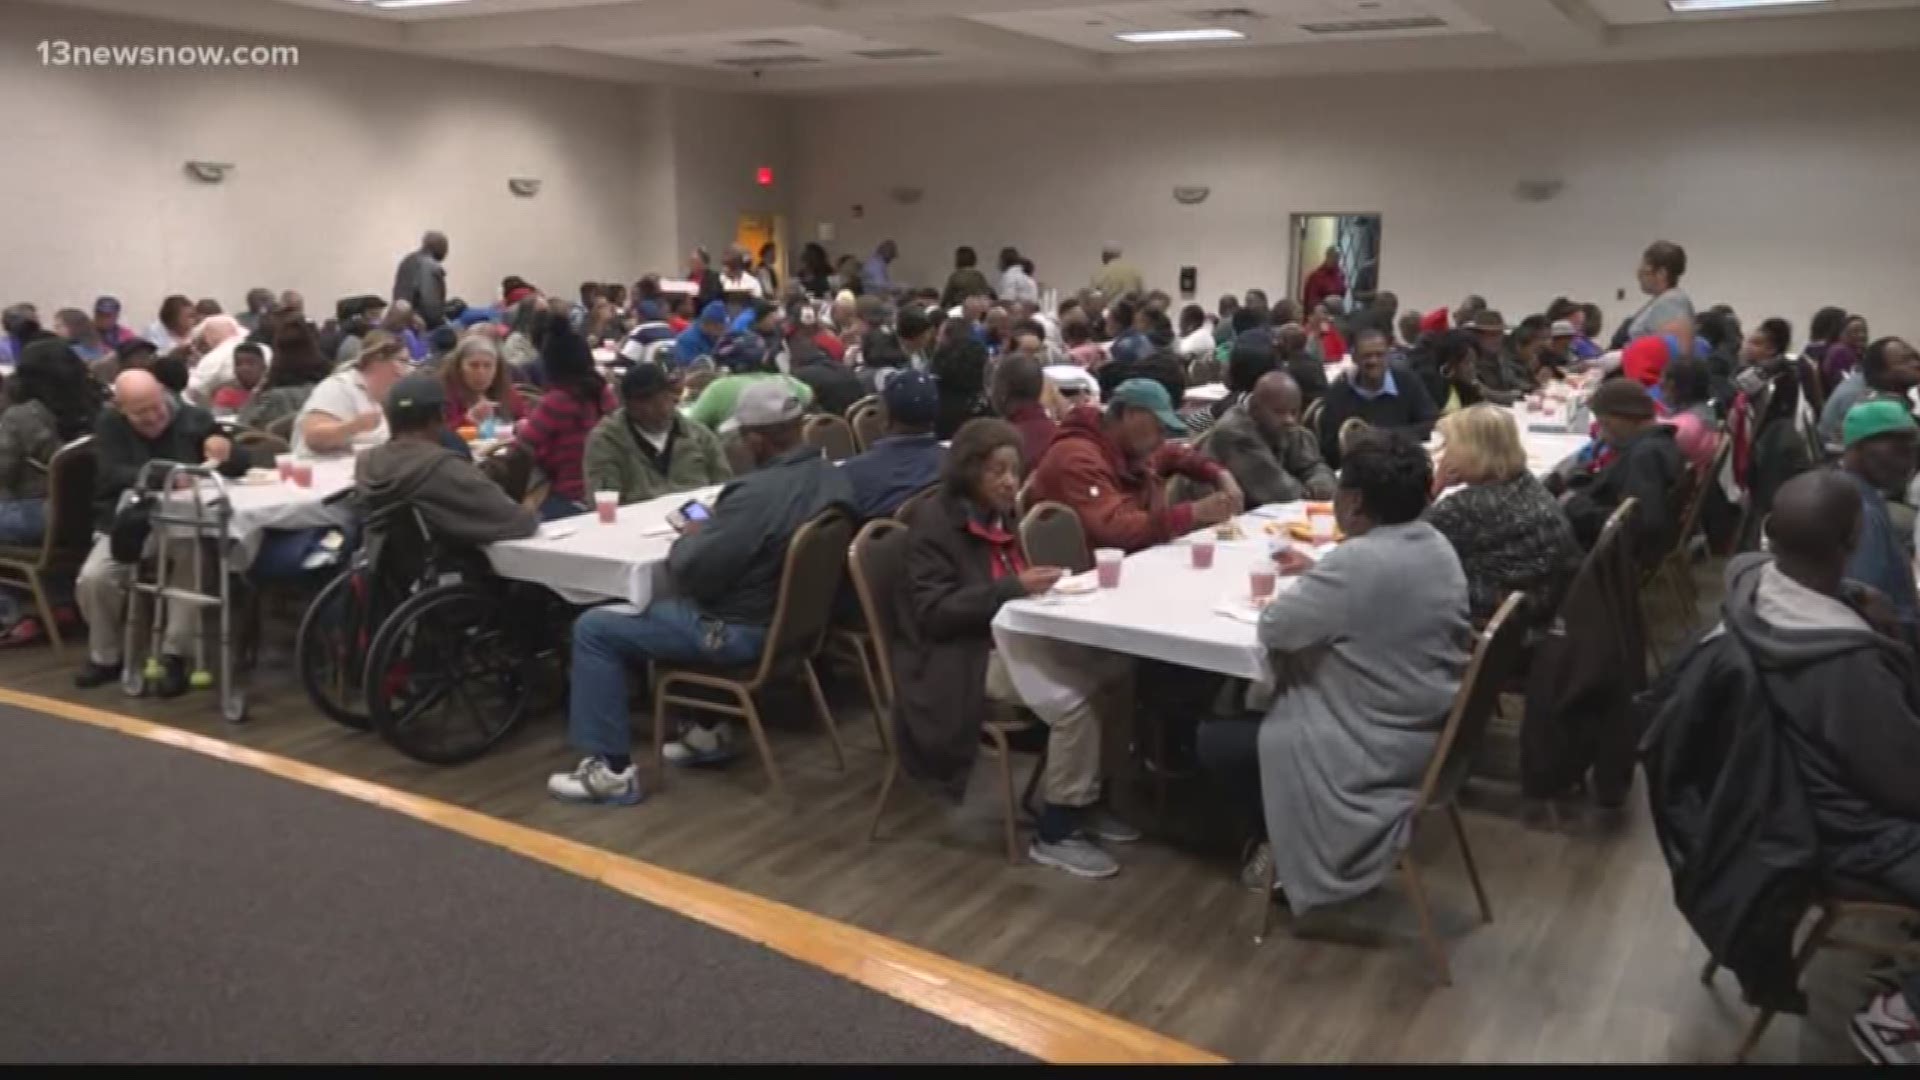 A church in Newport News opens its doors to give back to those in need.